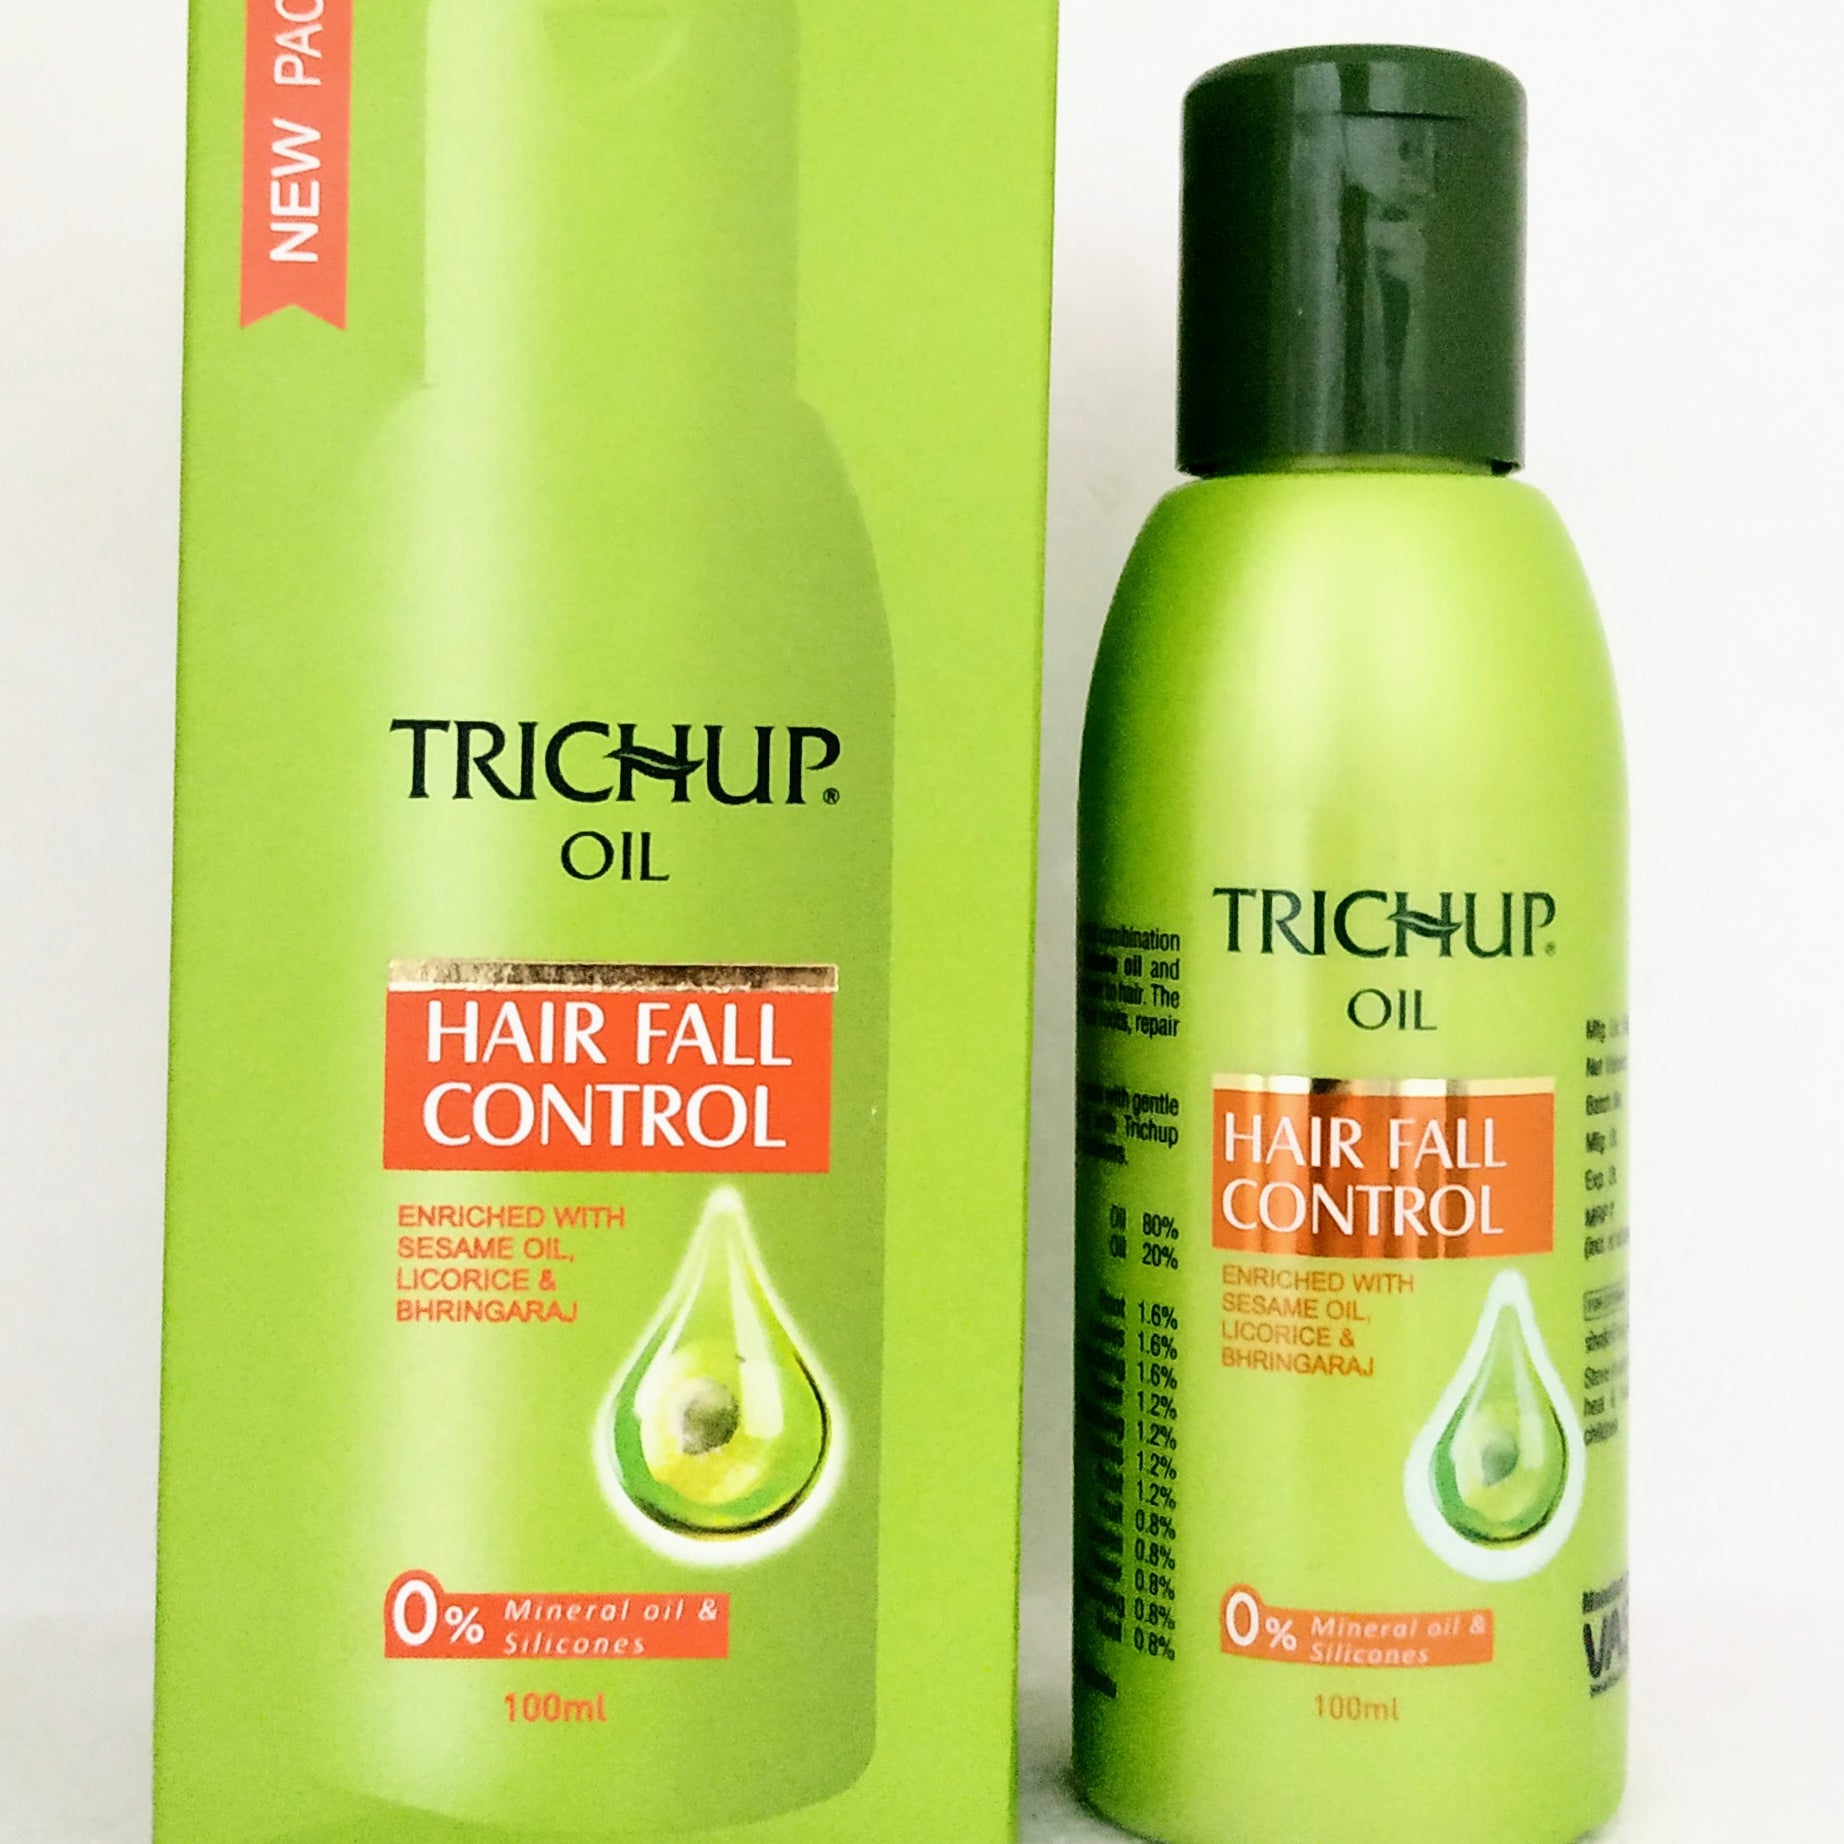 Shop Trichup Hairfall Control Oil 100ml at price 160.00 from Vasu herbals Online - Ayush Care